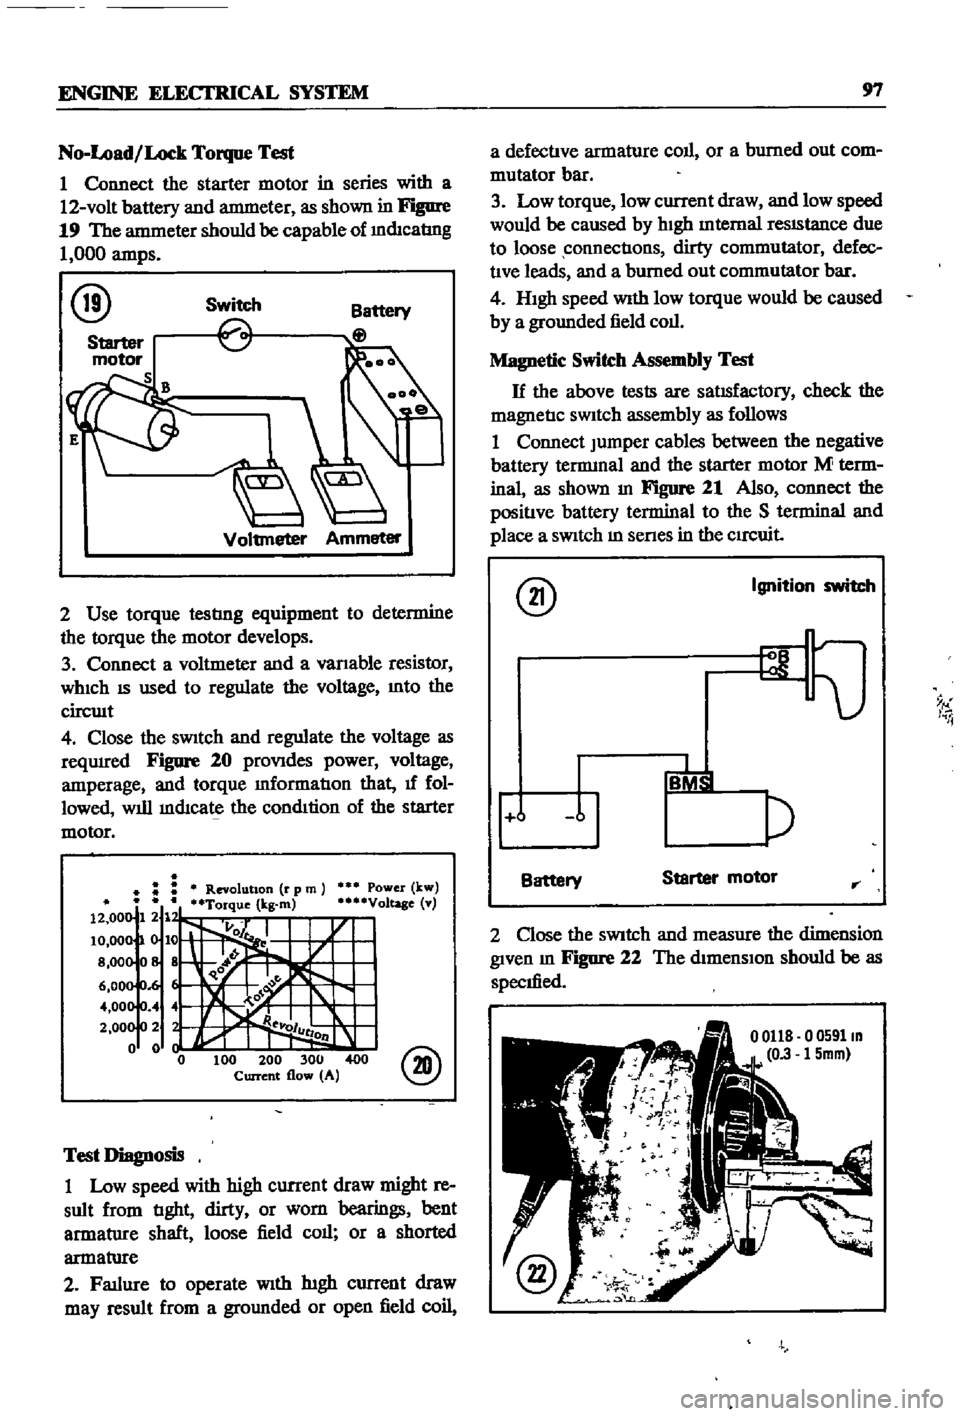 DATSUN 510 1968  Service Repair Manual 
ENGINE 
ELECI
RlCAL 
SYSTEM 
97

No 
Load 
Lock

Torque 
Test

1 
Connect 
the 
starter 
motor 
in 
series 
with

a

12 
volt

battery 
and 
antmeter 
as 
shown 
in

Figure

19 
The 
antmeter 
should